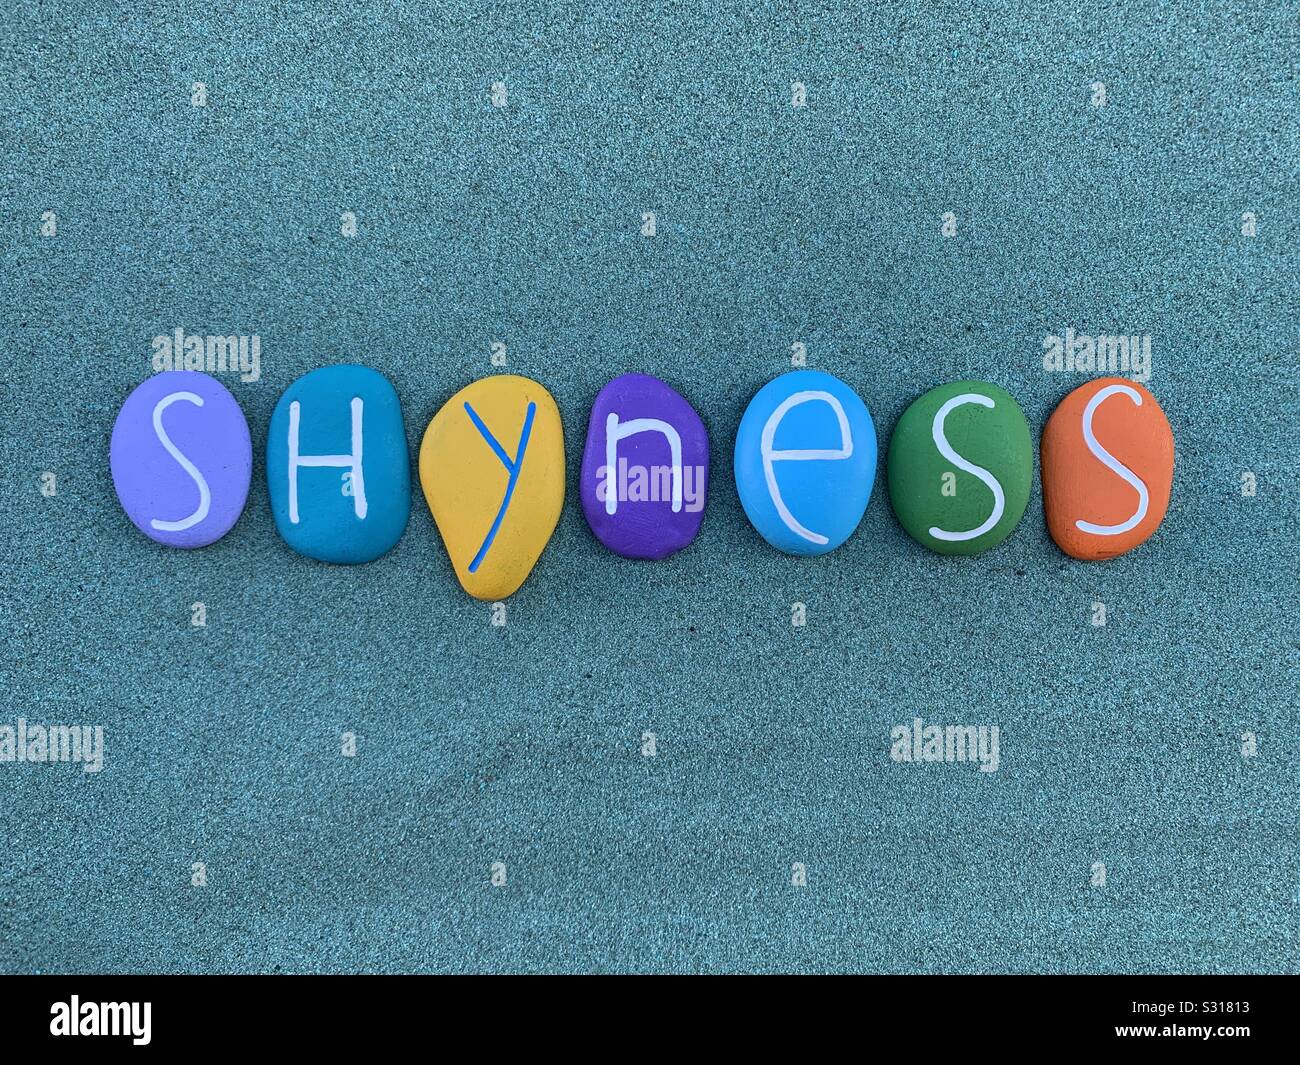 Shyness word composed with multi colored stone letters over green sand Stock Photo